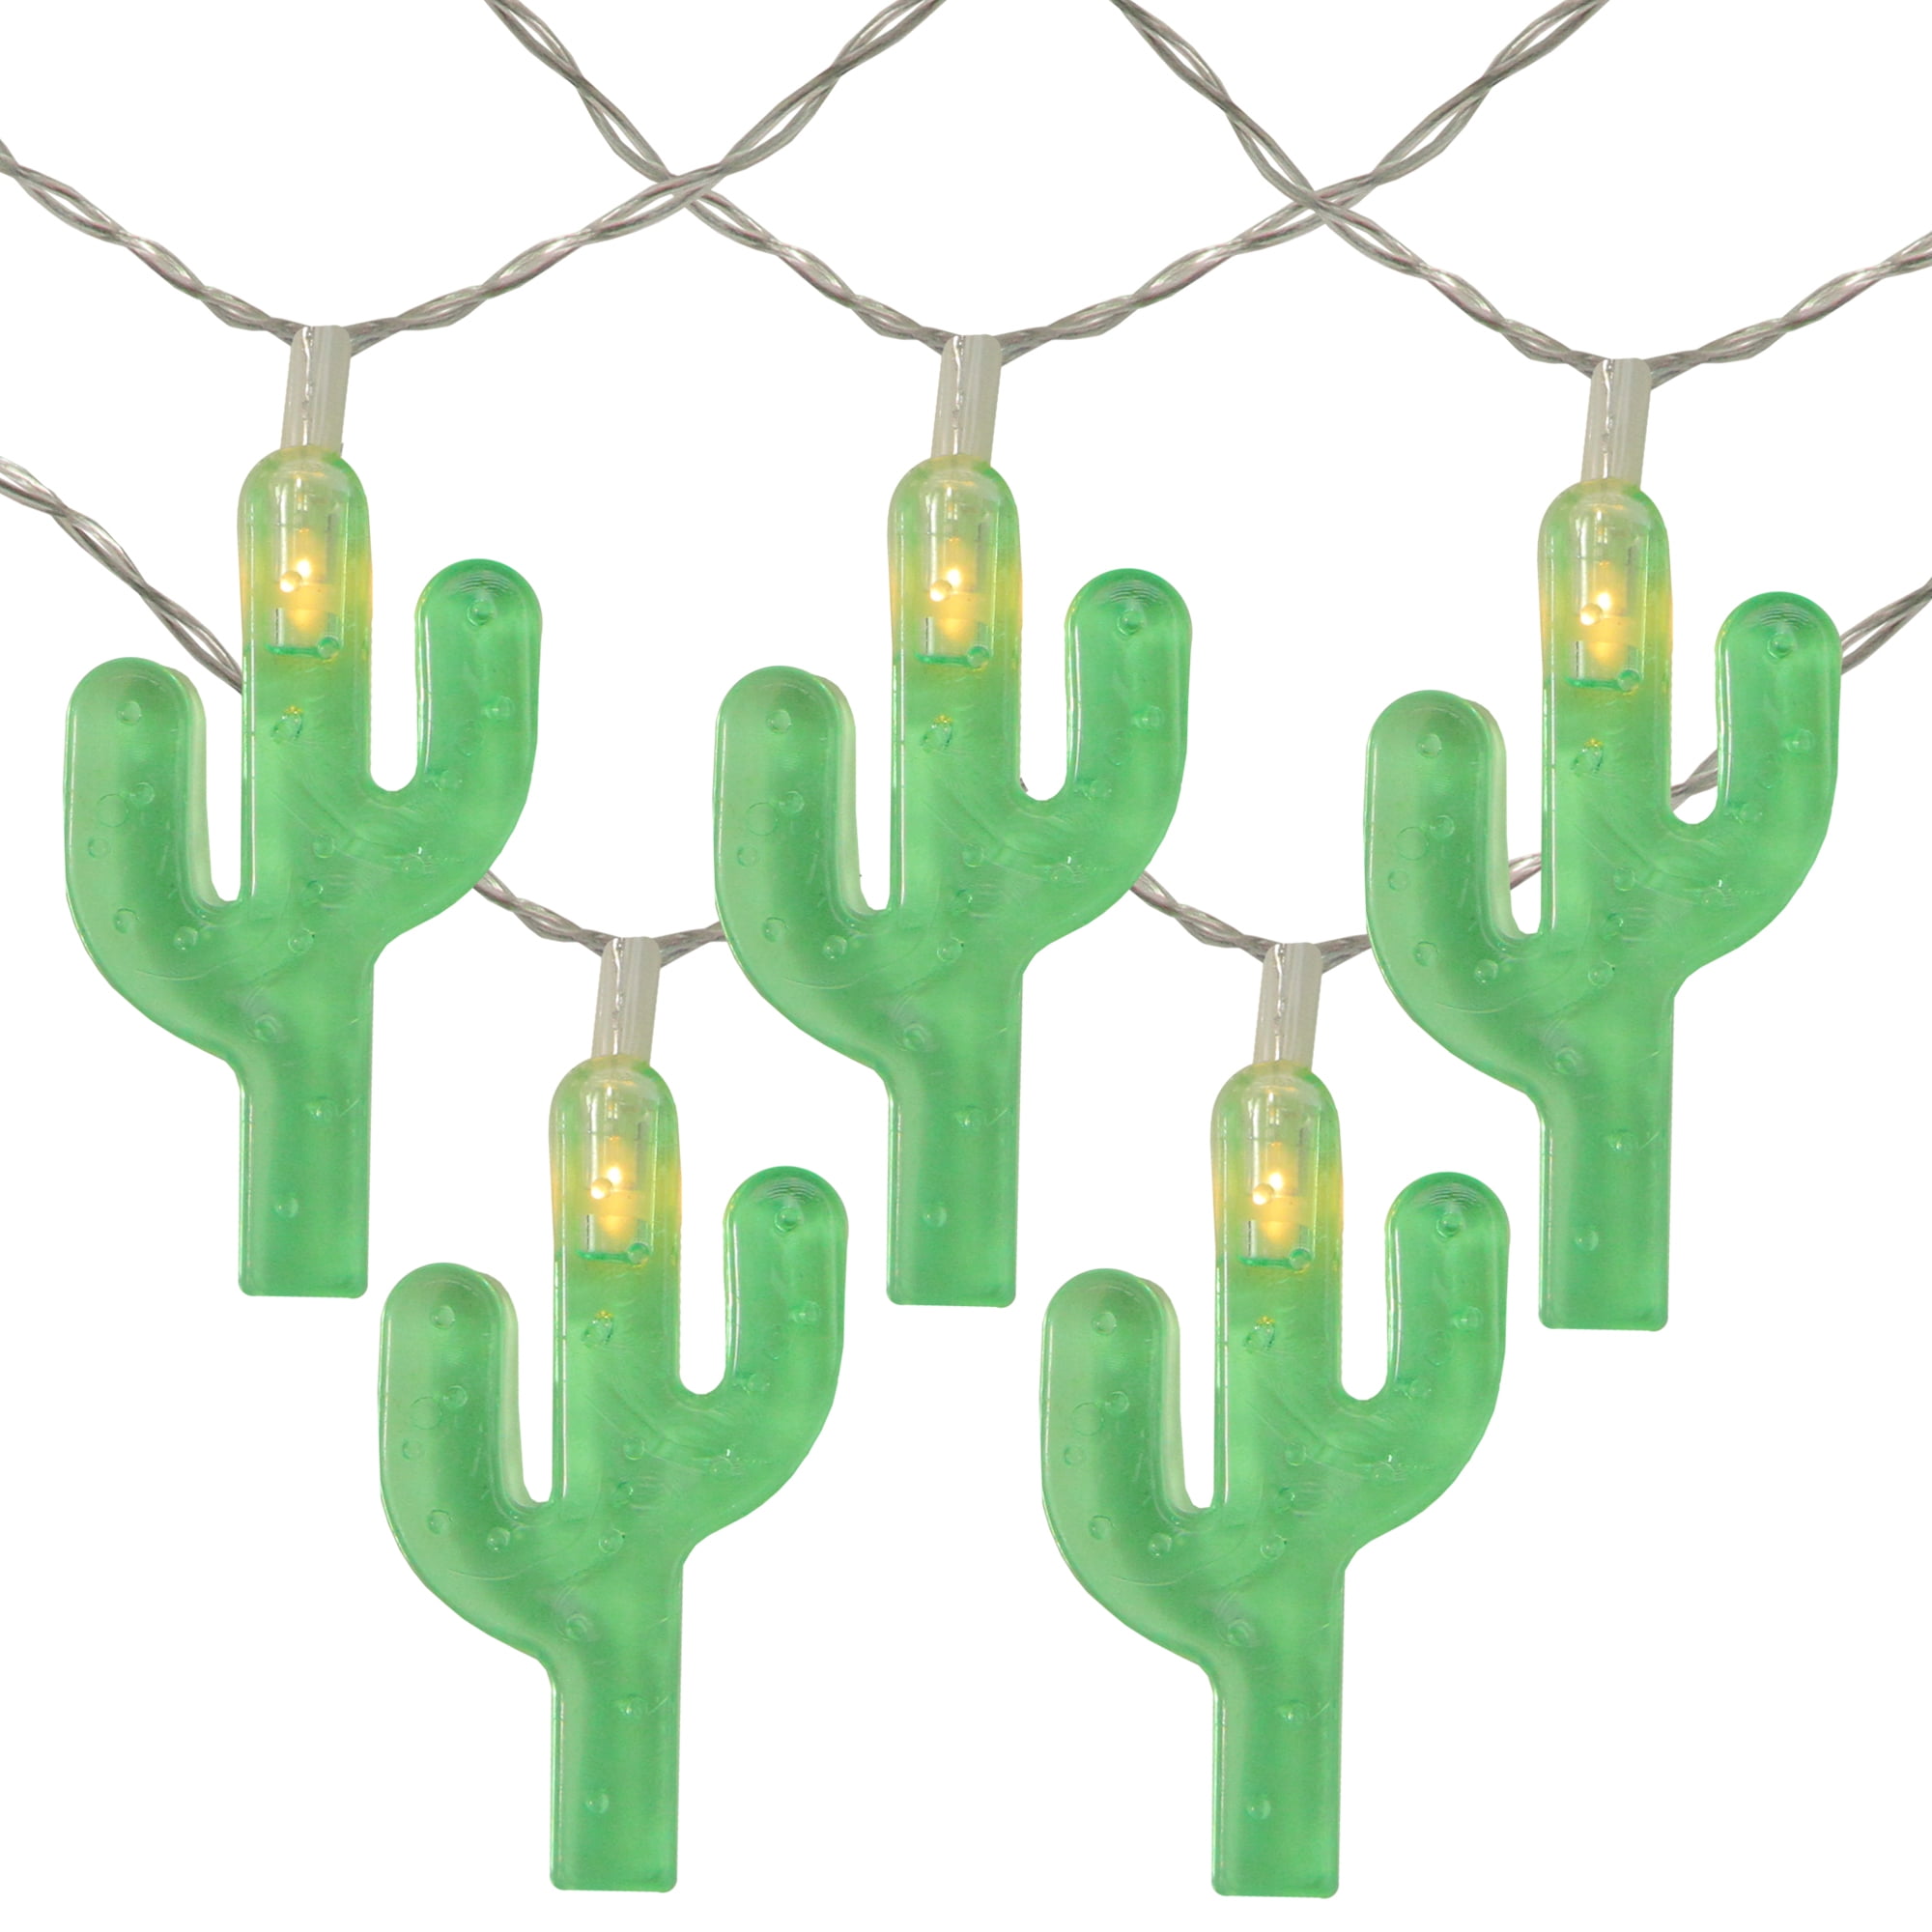 TopHGC Cactus LED String Light 30 LEDs Warm White Battery Fairy Cactus Beautiful String Light for Resin Mold Filling Patio Tree Decoration Home Party Garden 